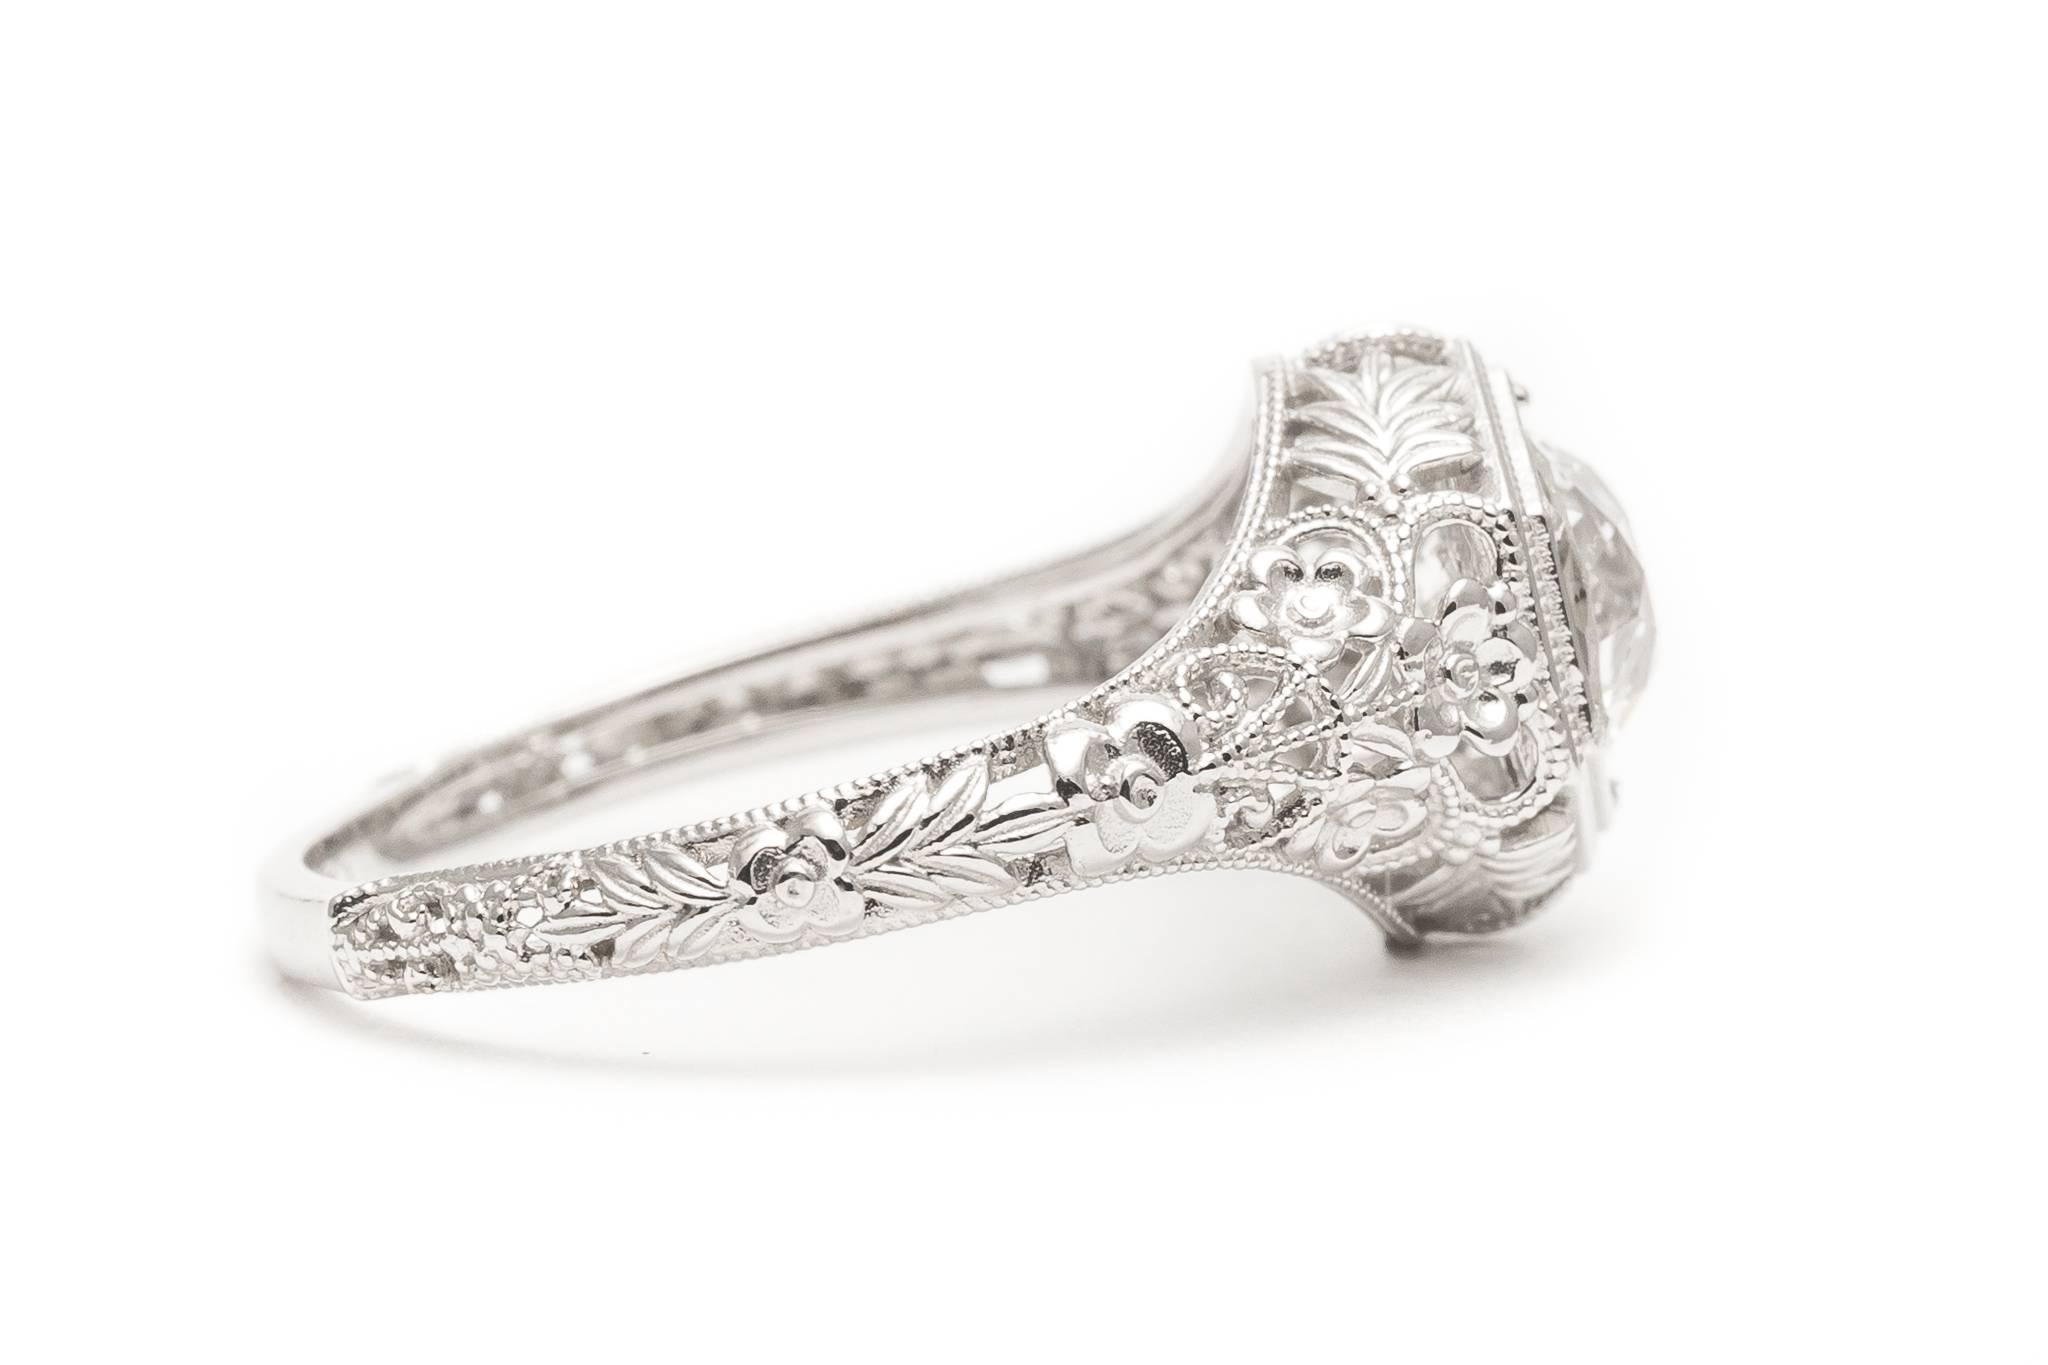 Handmade 1.20 Carat Diamond Platinum Floral Filigree Engagement Ring  In Excellent Condition For Sale In Boston, MA